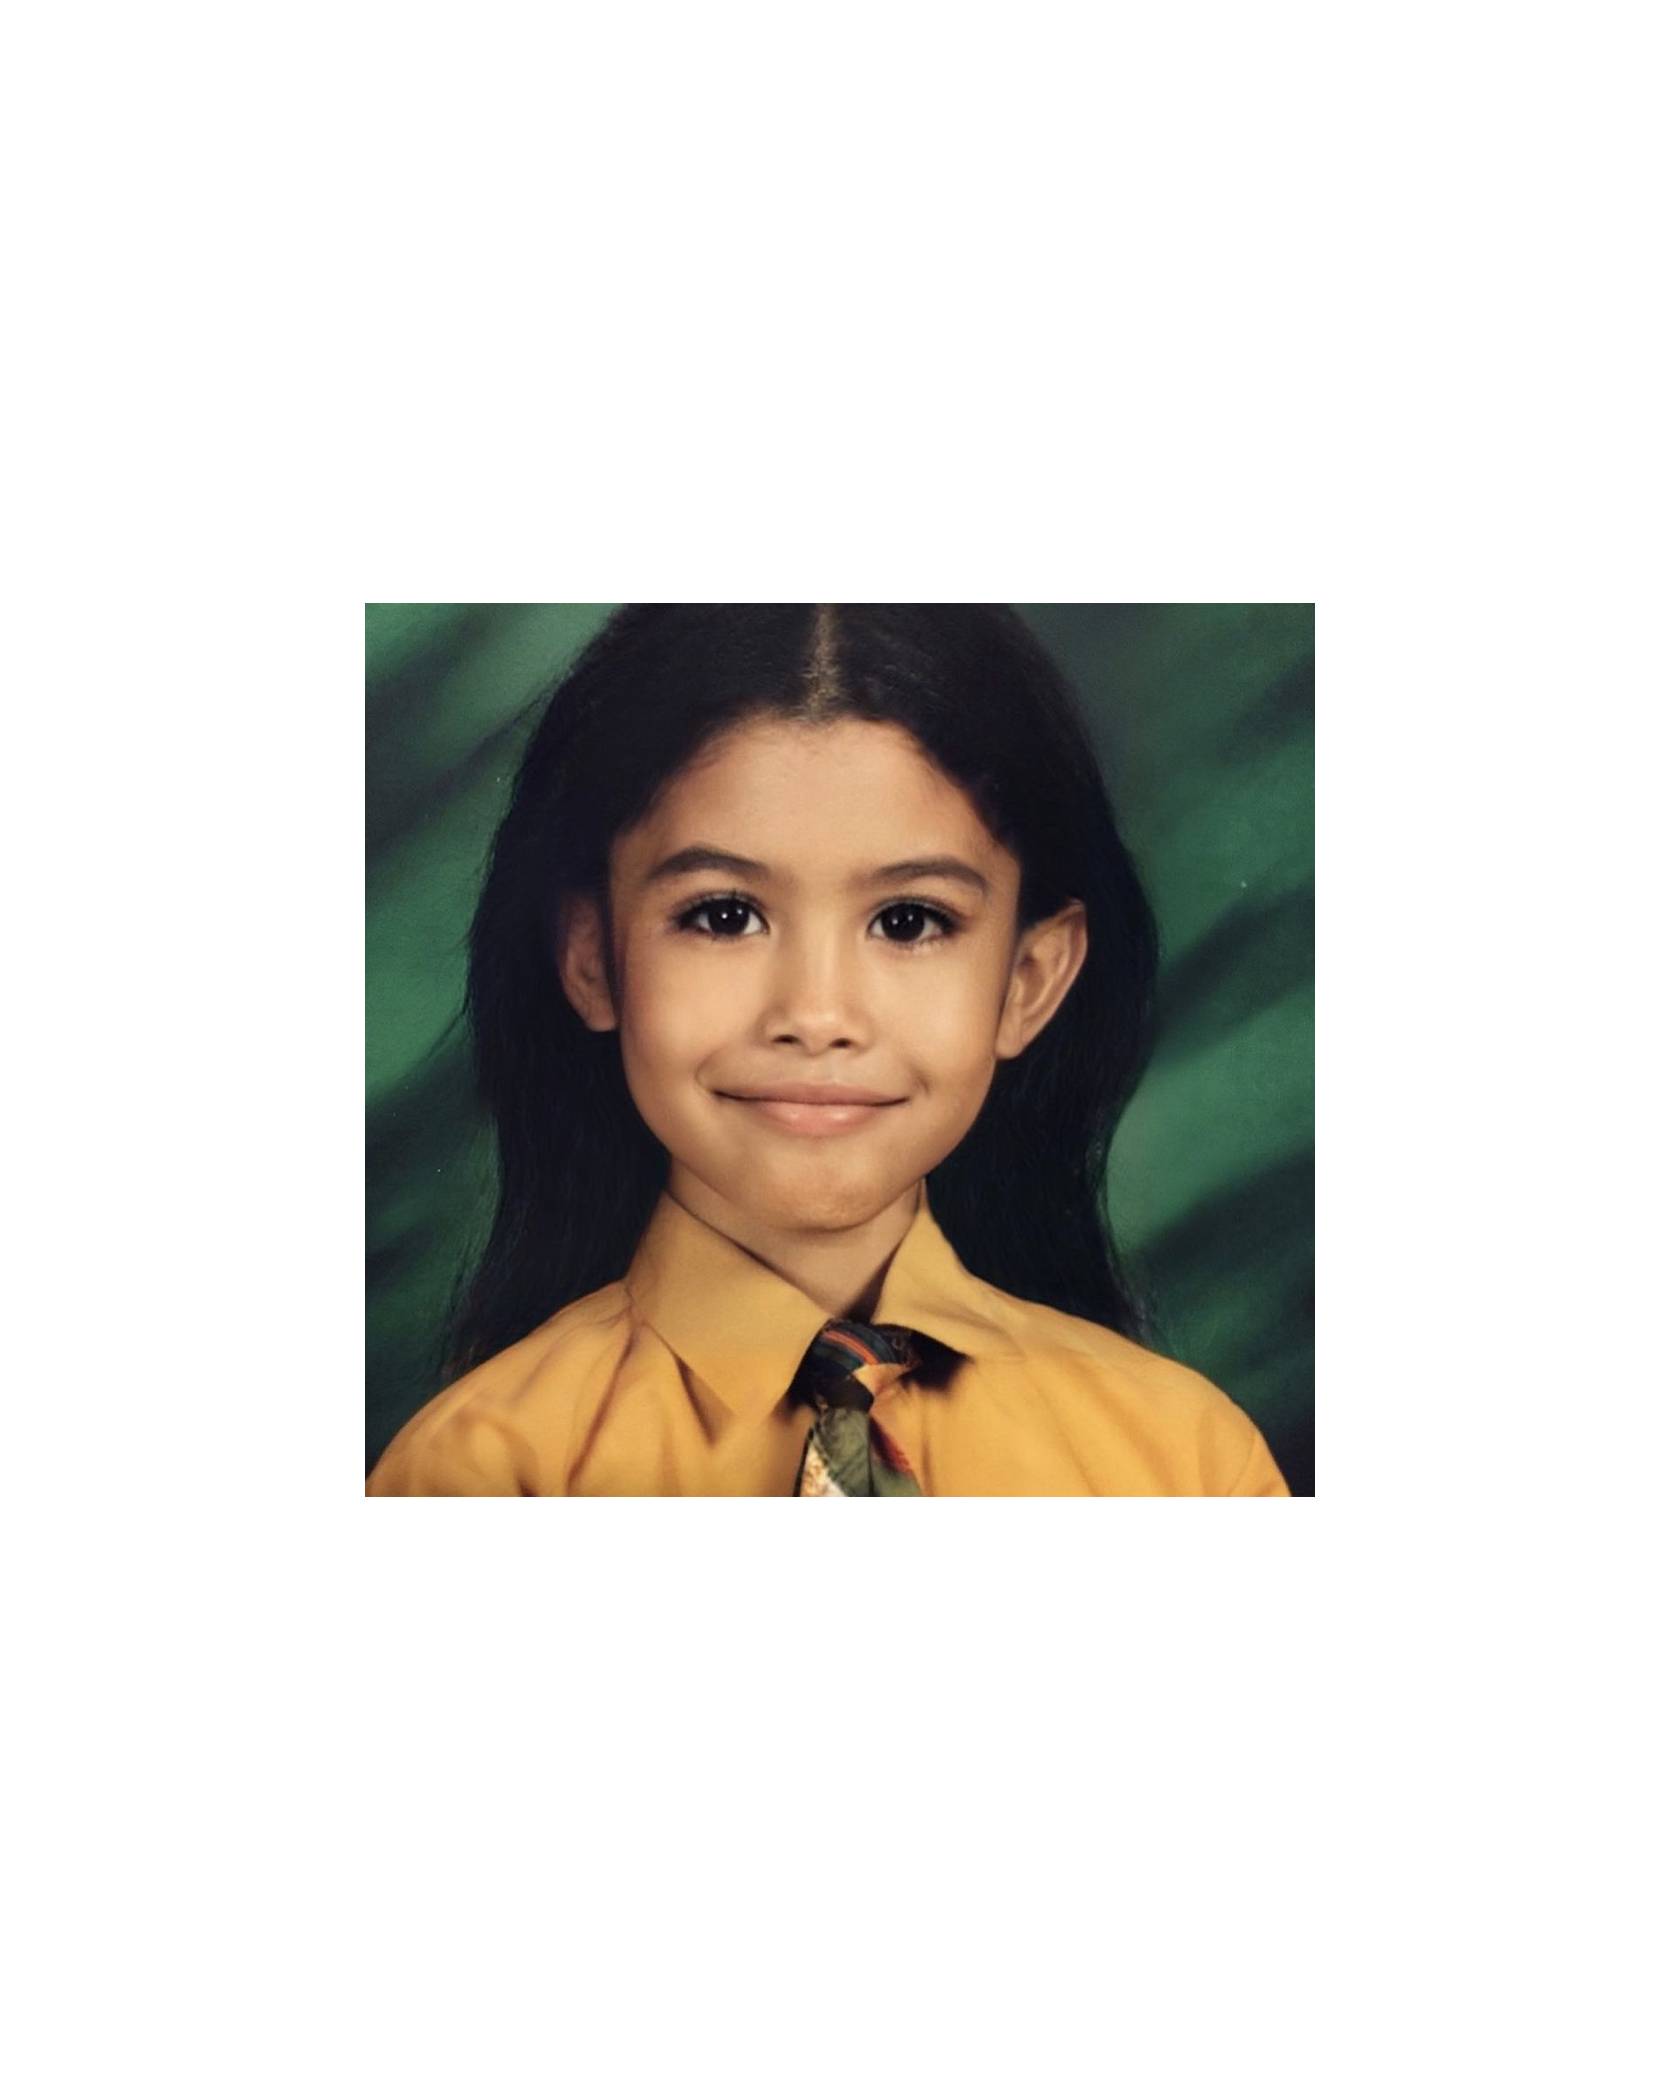 A childhood photo of Leyna Bloom wearing an orange/yellow shirt and a colorful tie.